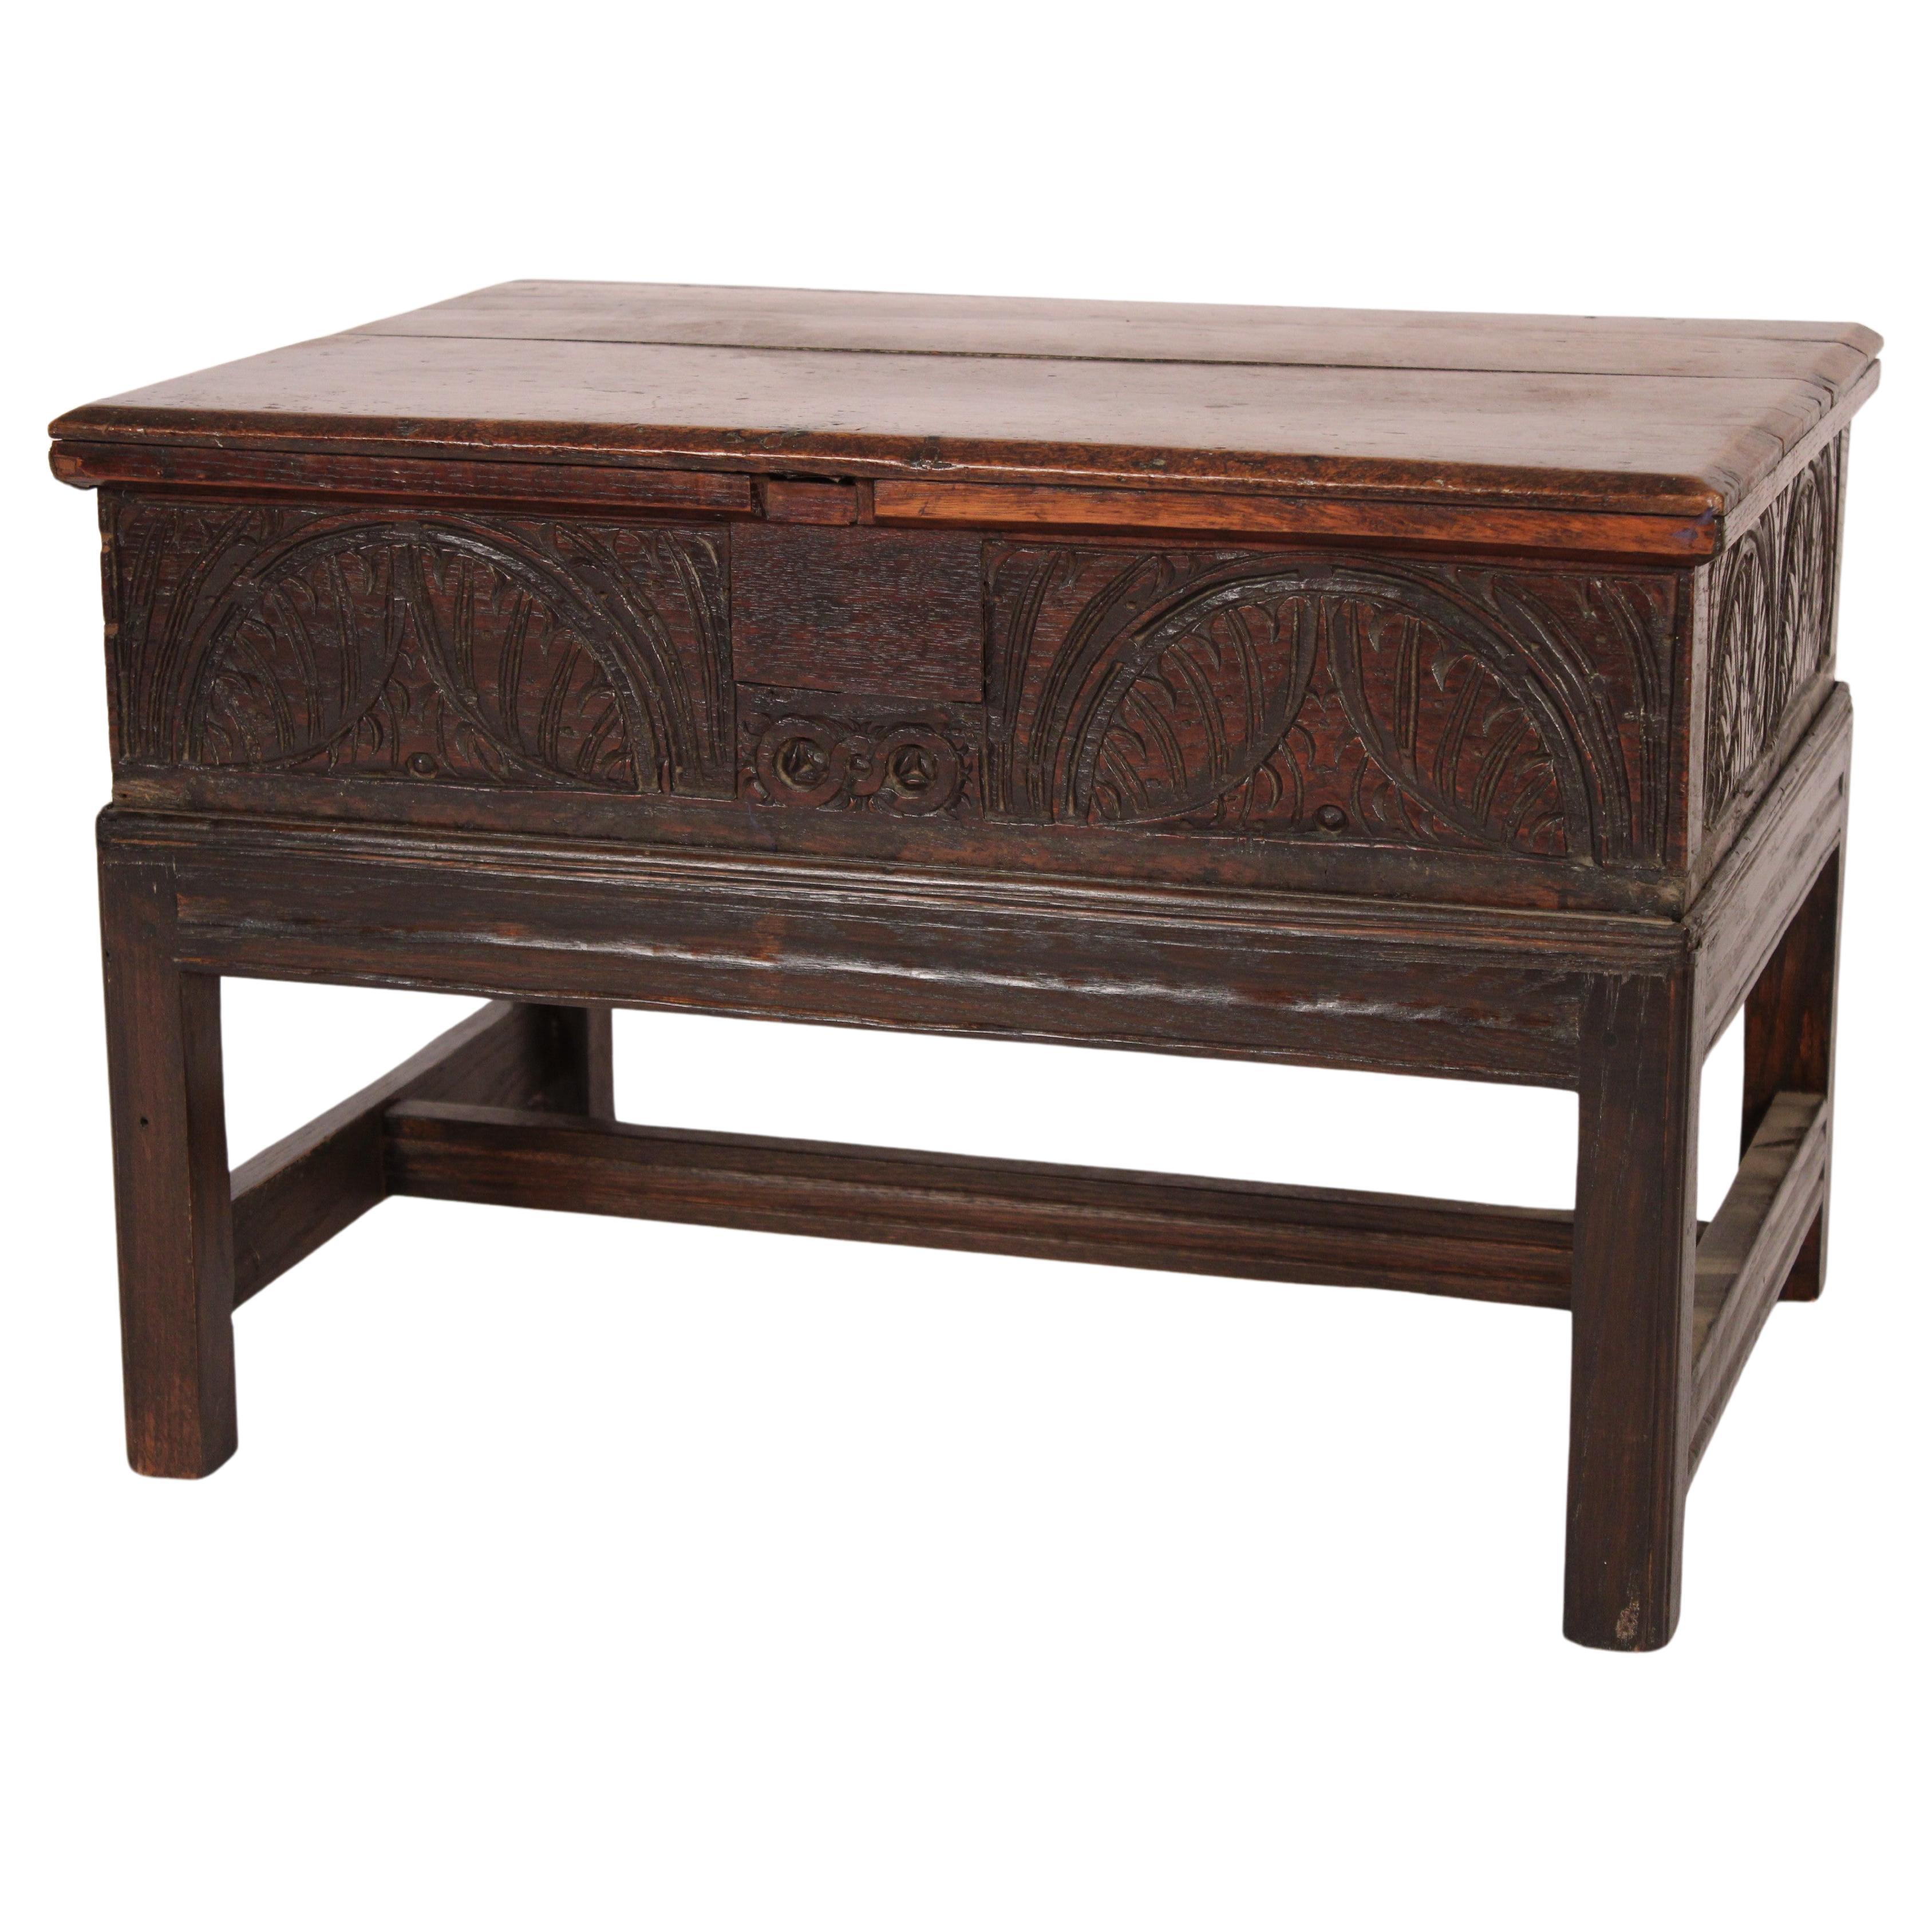 18th Century English Oak Bible Box / Side Table For Sale